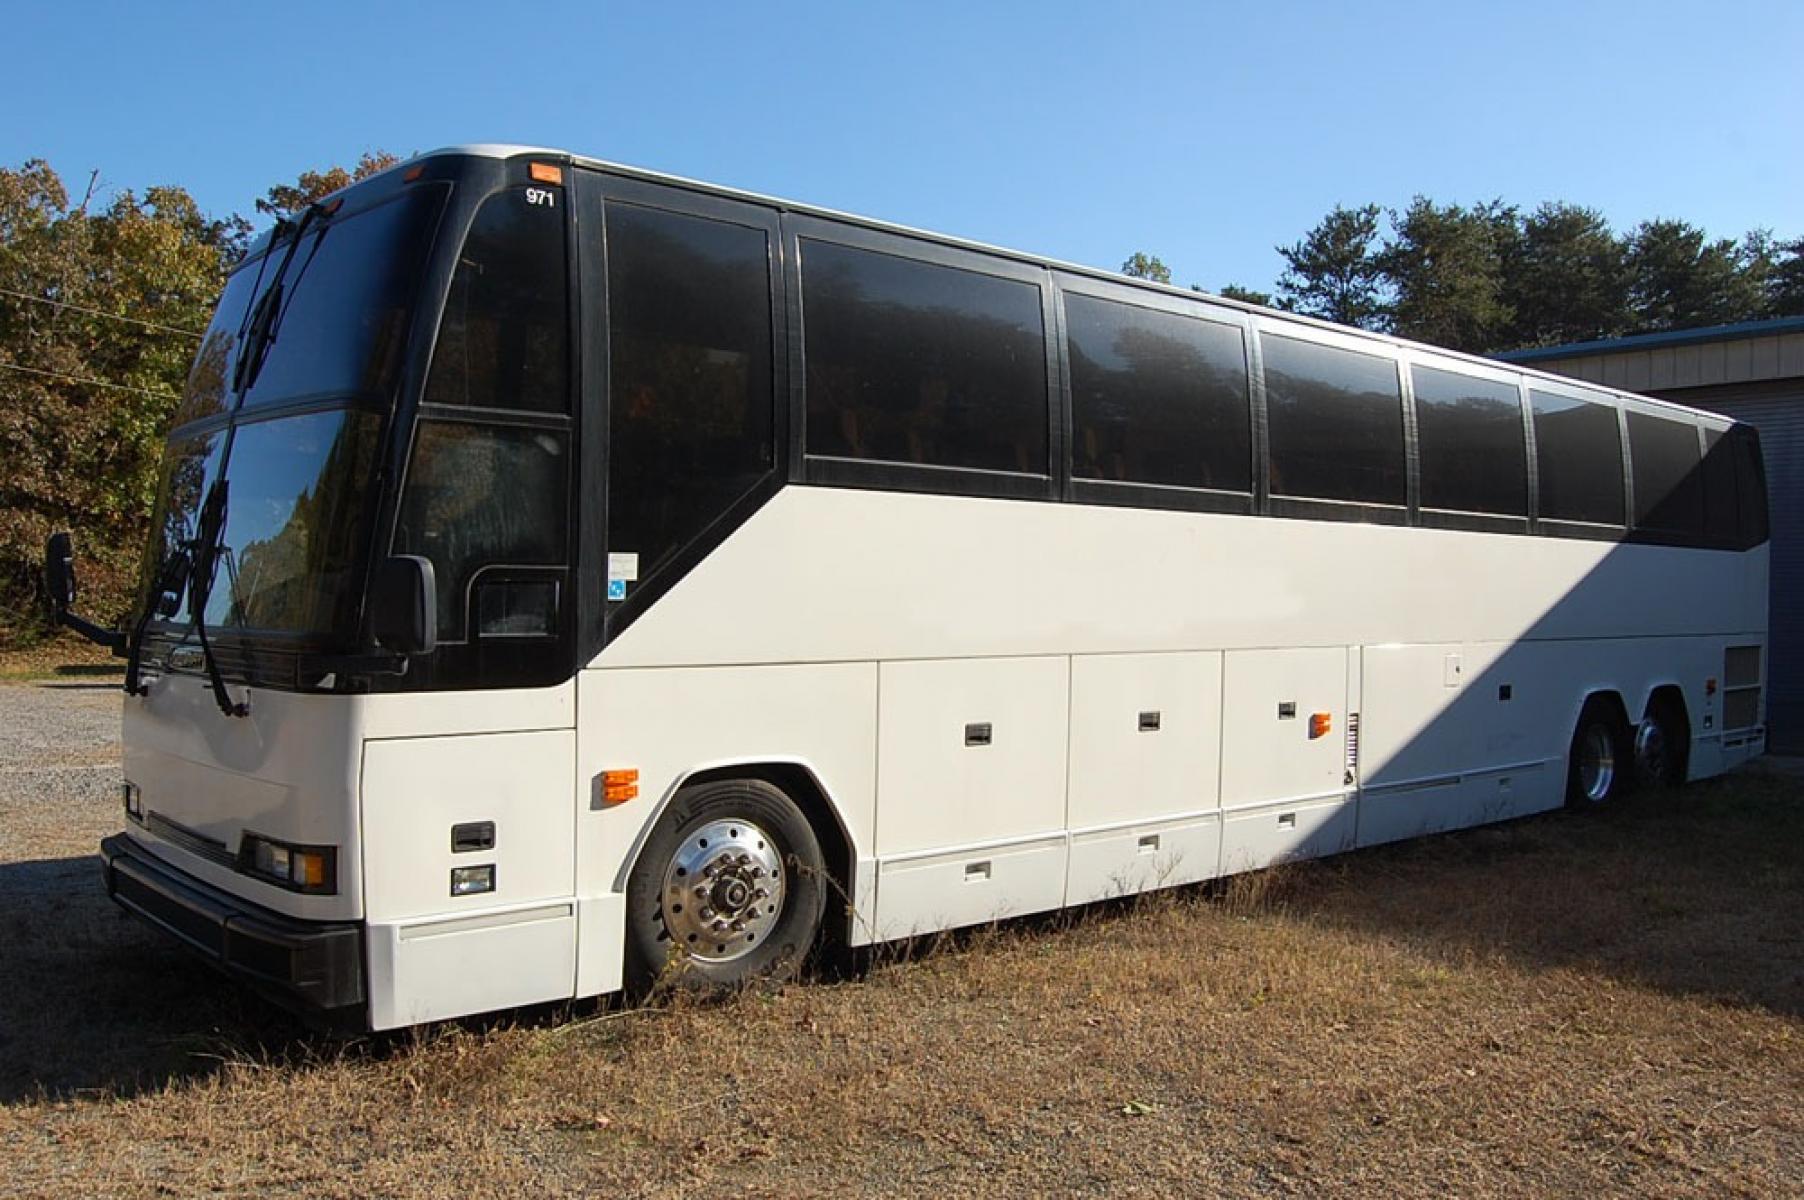 1997 Prevost HS-45 with an Detroit Diesel Series 60 engine, Allison transmission, 0.000000, 0.000000 - 1997 Prevost H3-45 - Series 60 Detroit Diesel - Allison Automatic Transmission - 45' - Alloy Wheels - 56 Passengers - Open Parcel Racks - 3 Monitors and DVD – Restroom - Photo #2